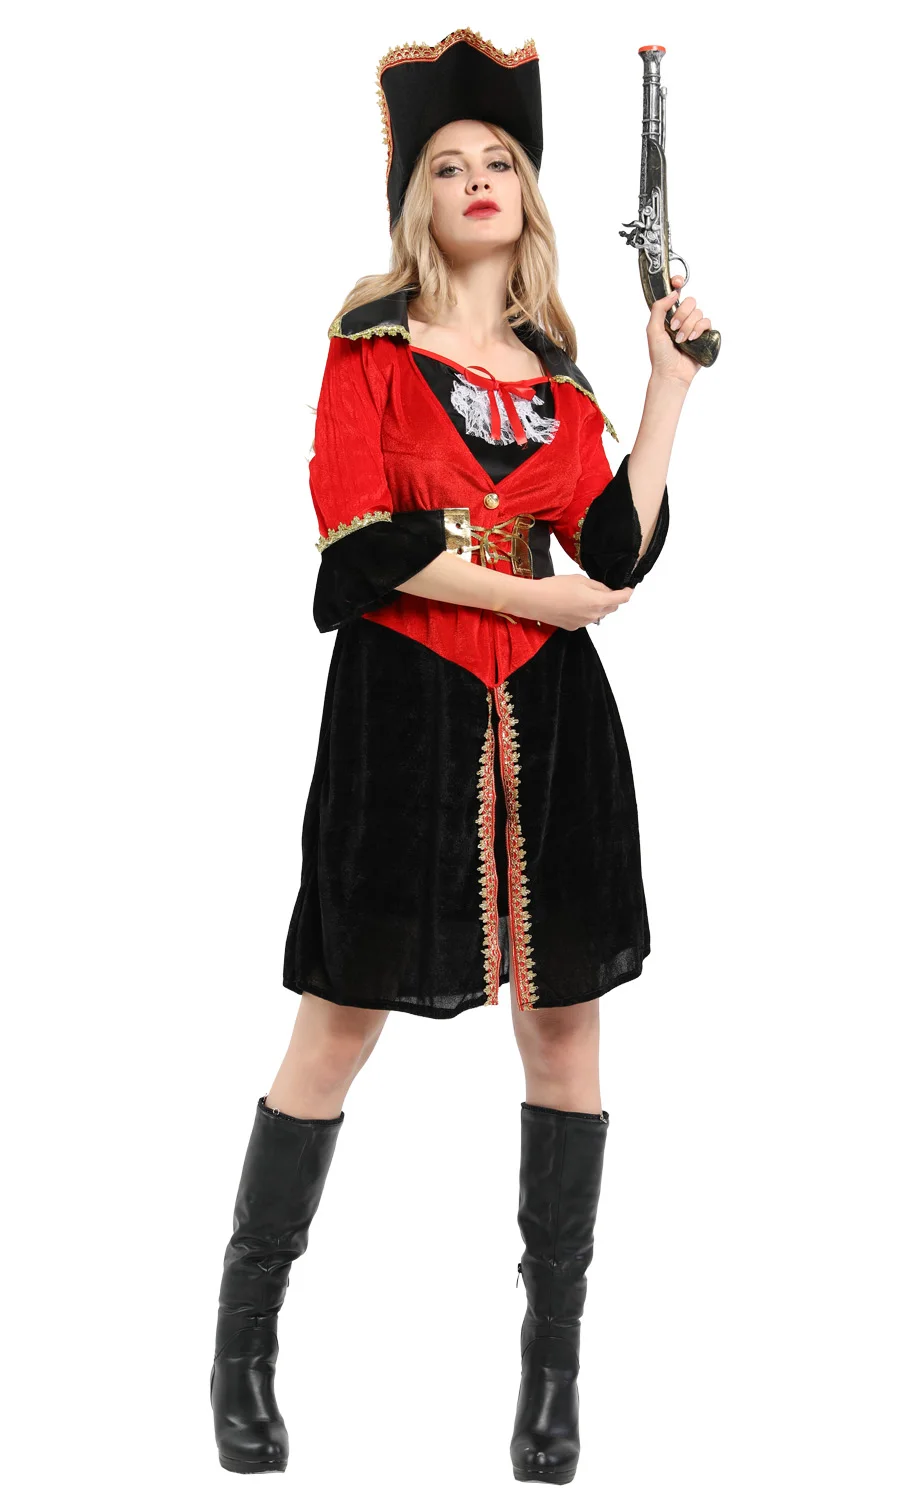 Adult Halloween Cosplay Costume Adult Stage Performance Suit Pirate Dress Pirate Princess Dress